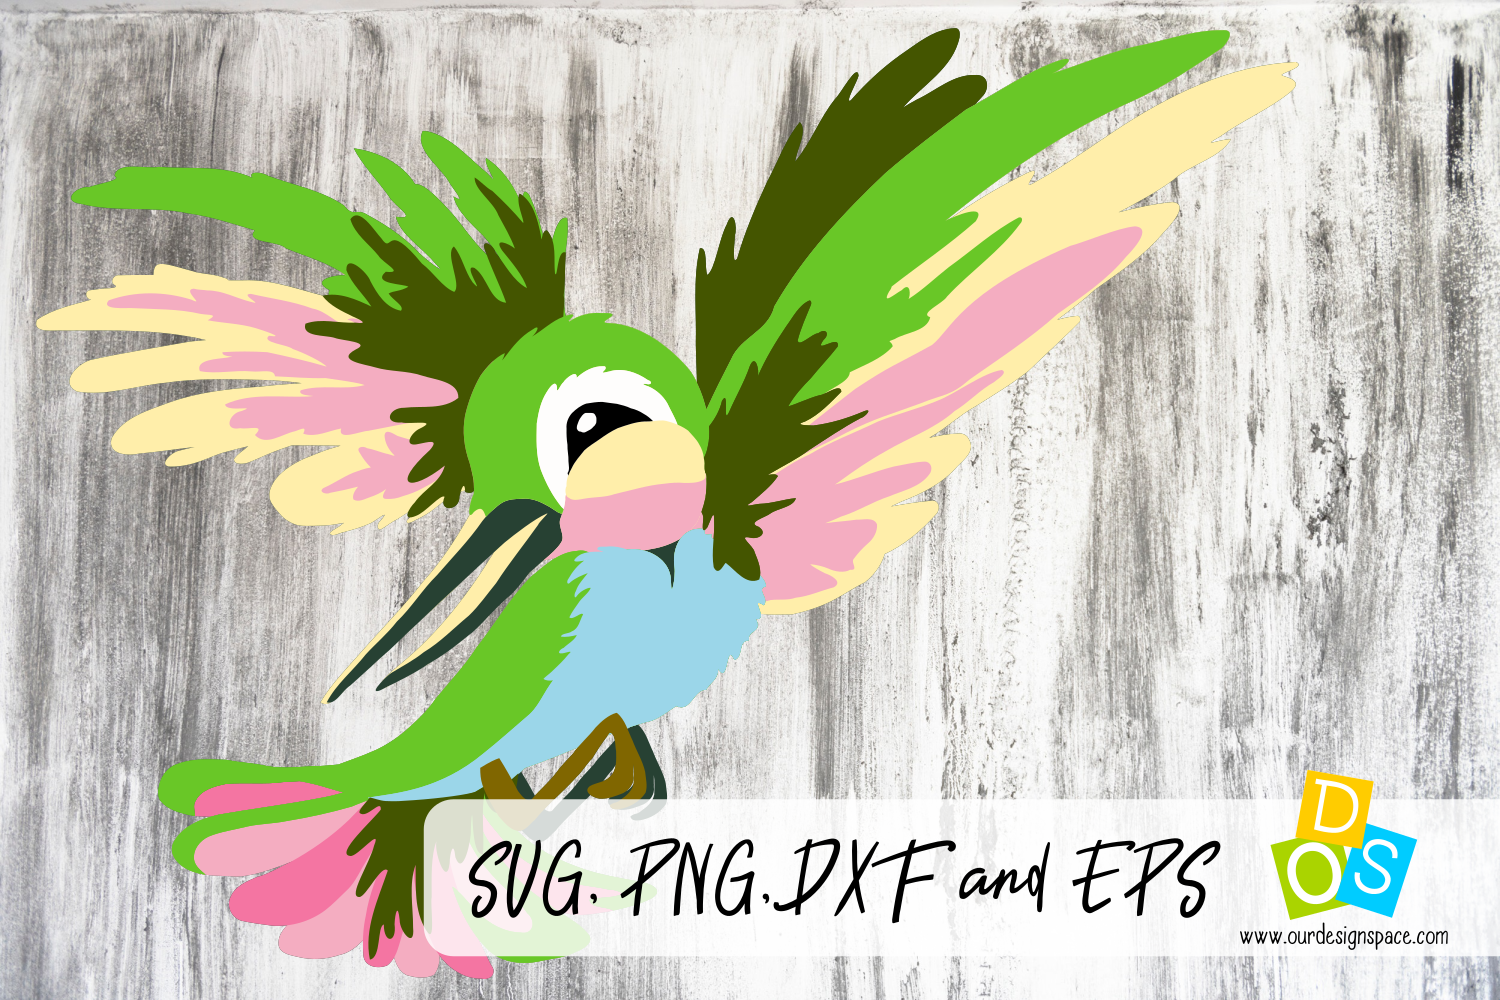 Download Hummingbird SVG, PNG, DXF and EPS cutting file